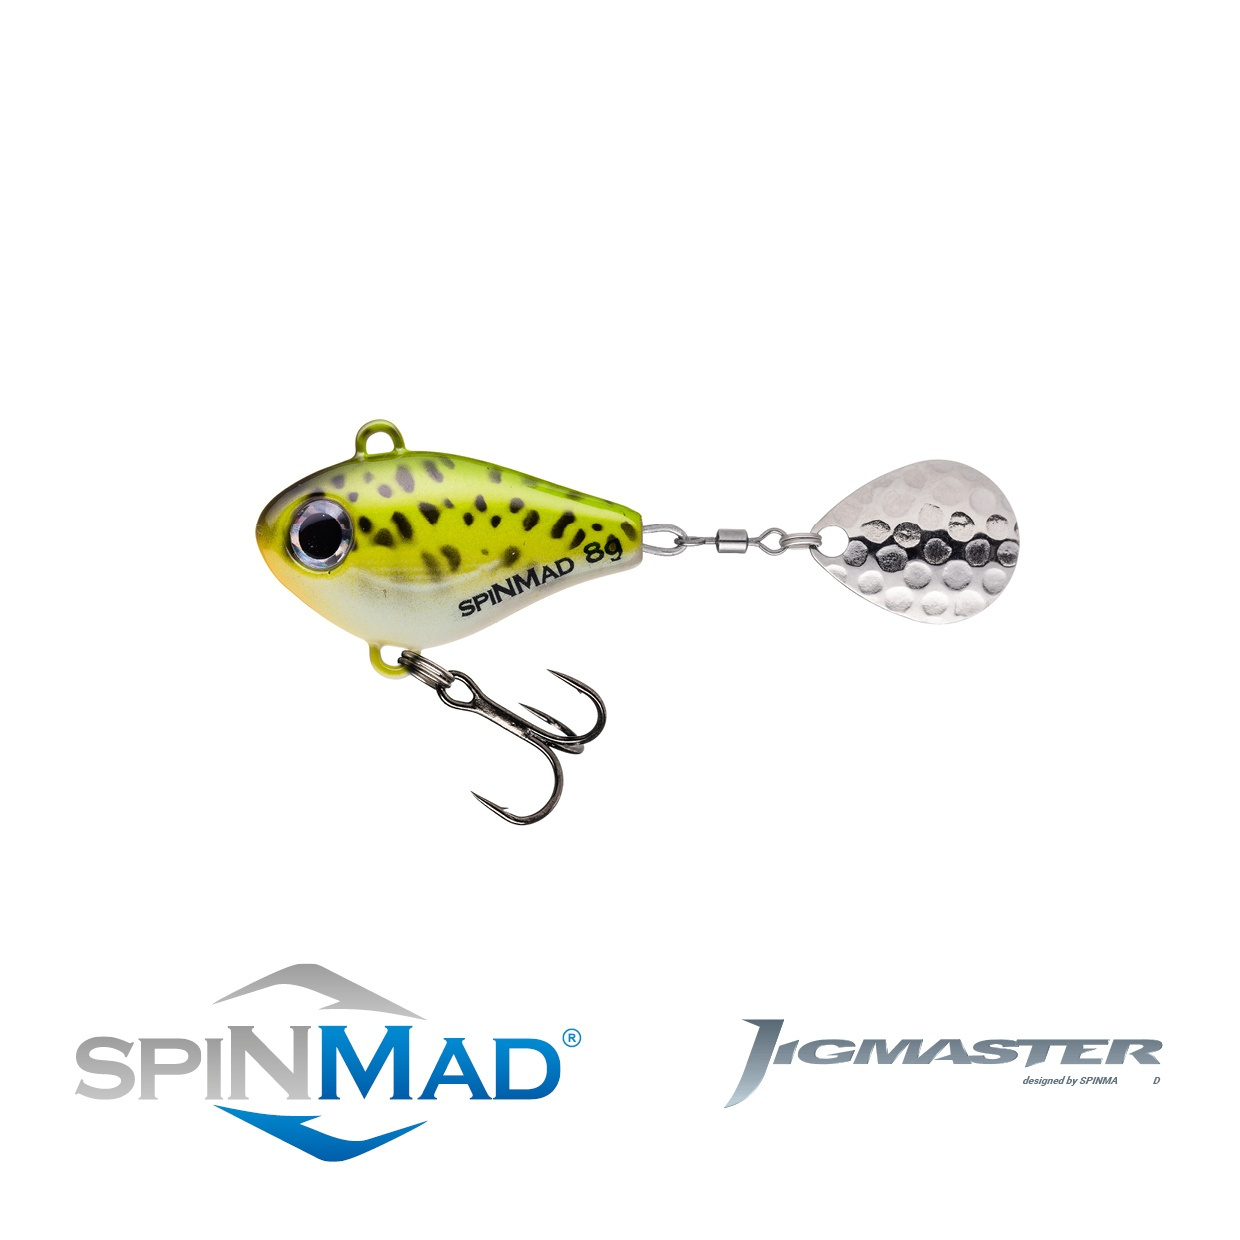 Spinmad Jigmaster 8g - 2308